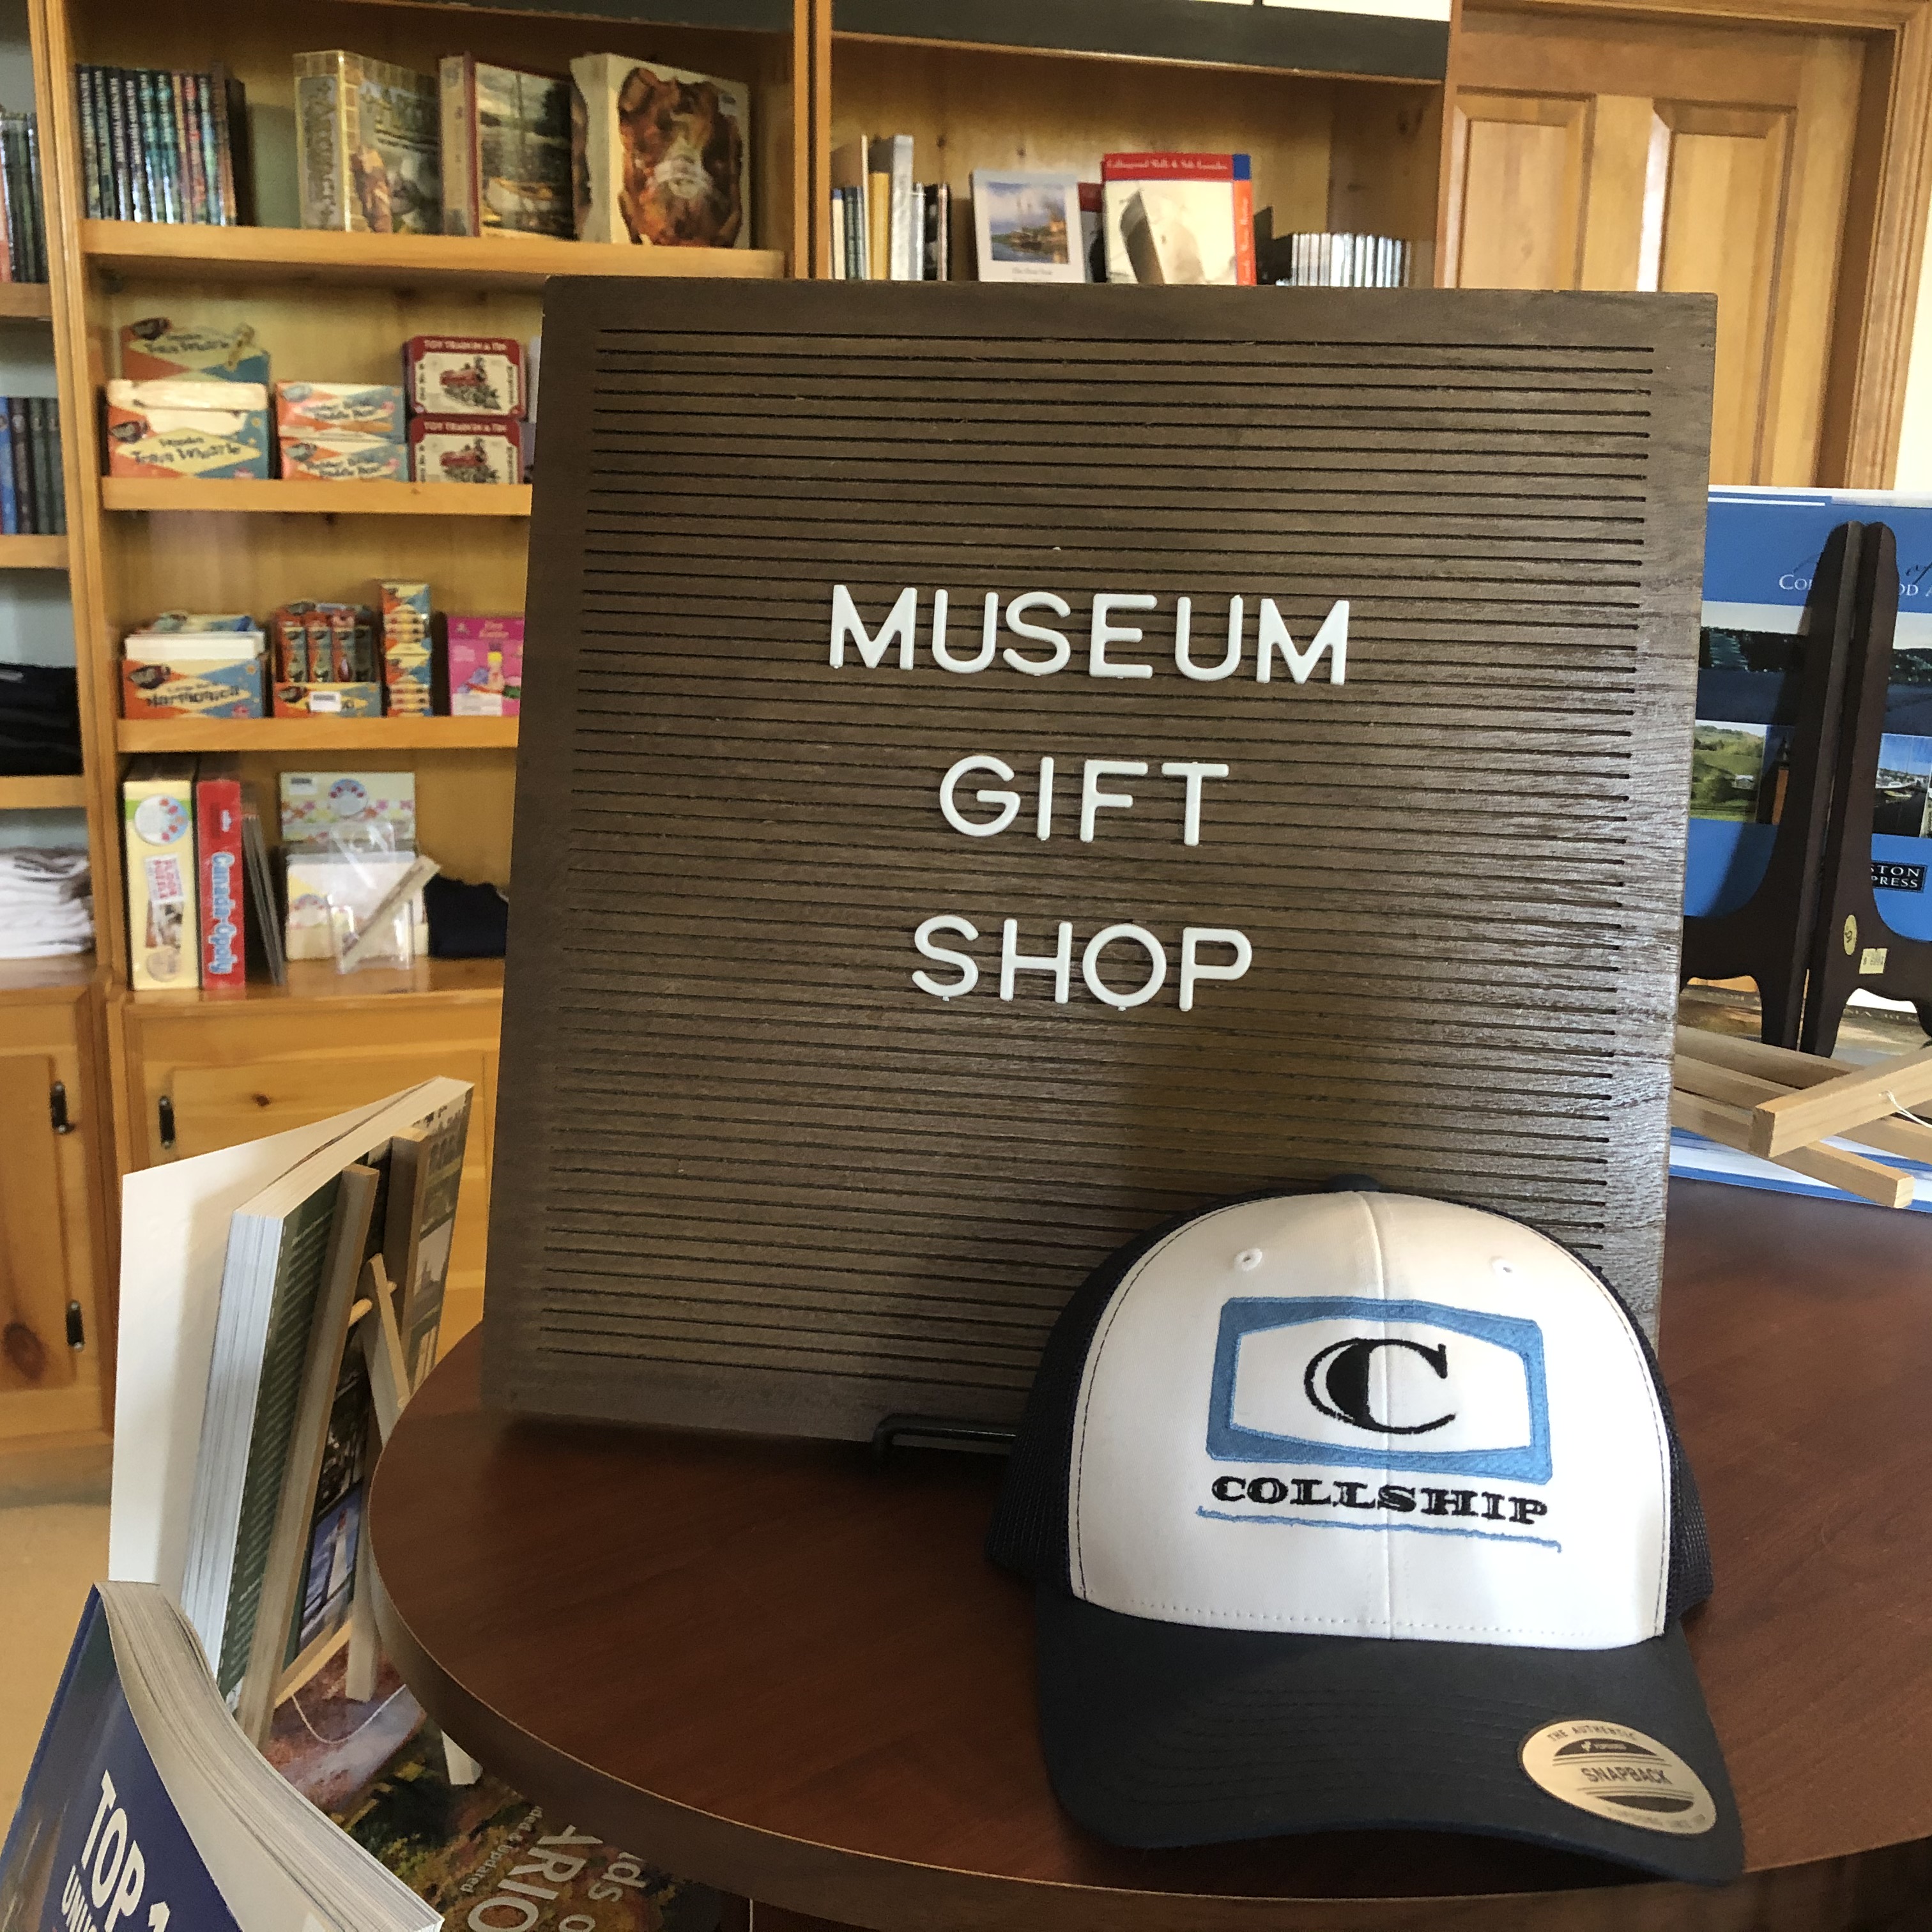 letterboard sign with words "Museum Gift Shop" and souvenier hat in front